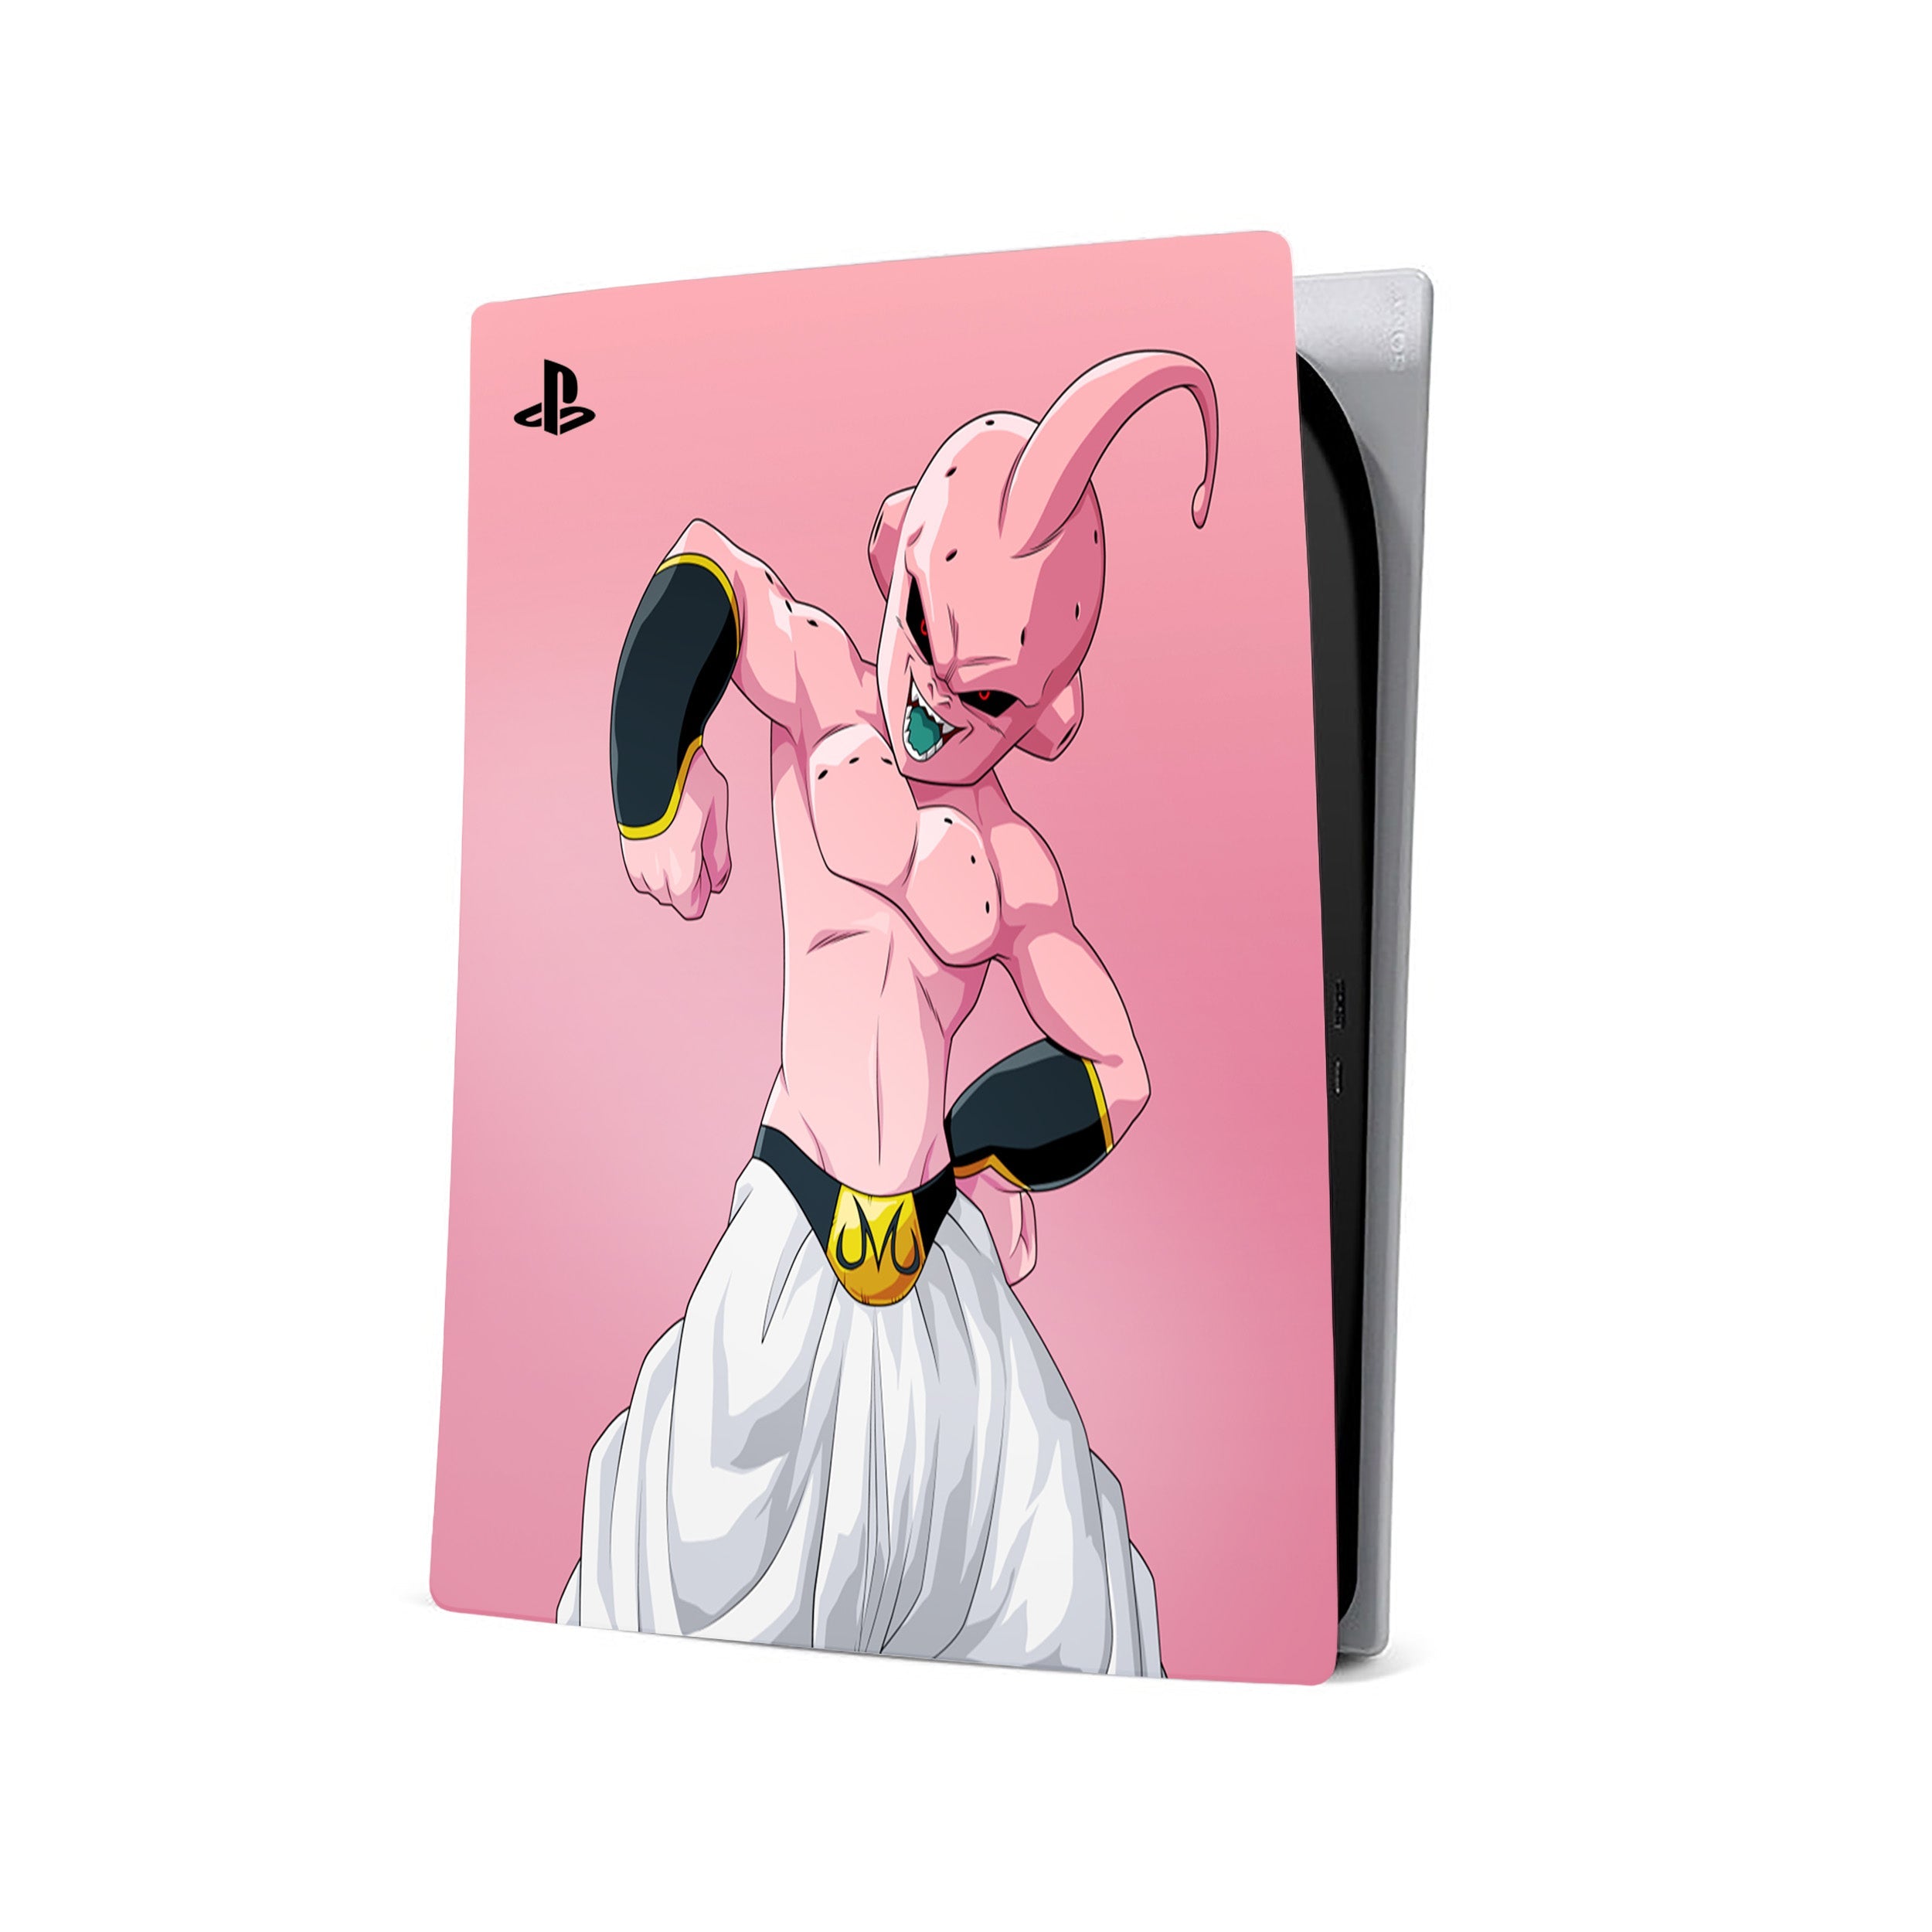 A video game skin featuring a Dragon Ball Z Kid Buu design for the PS5.